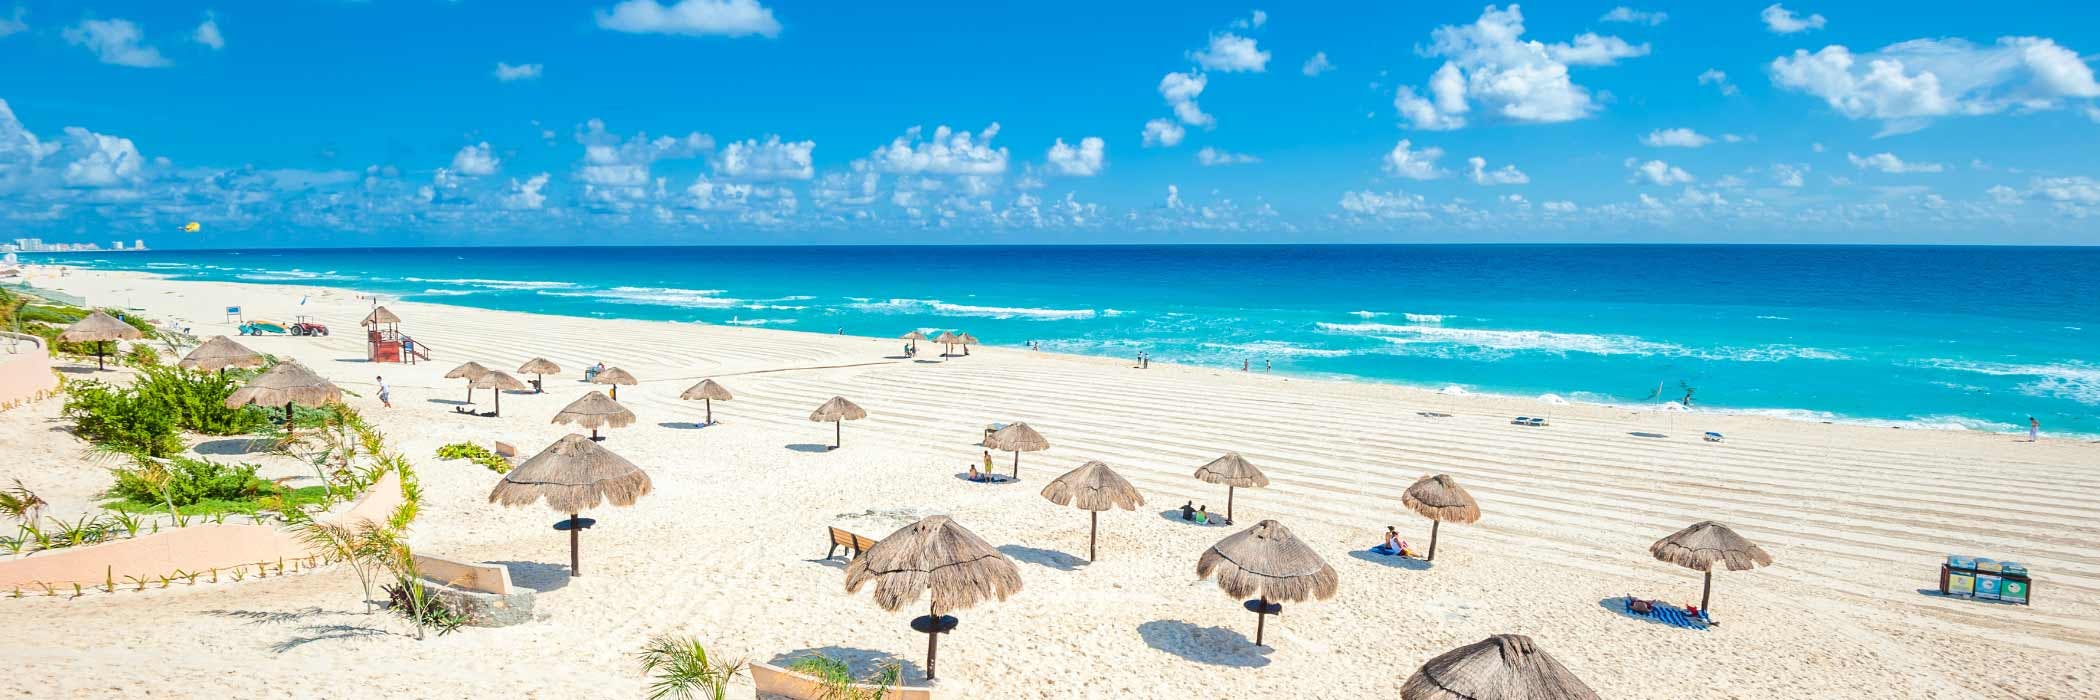 Cancun - Holidays to Mexico